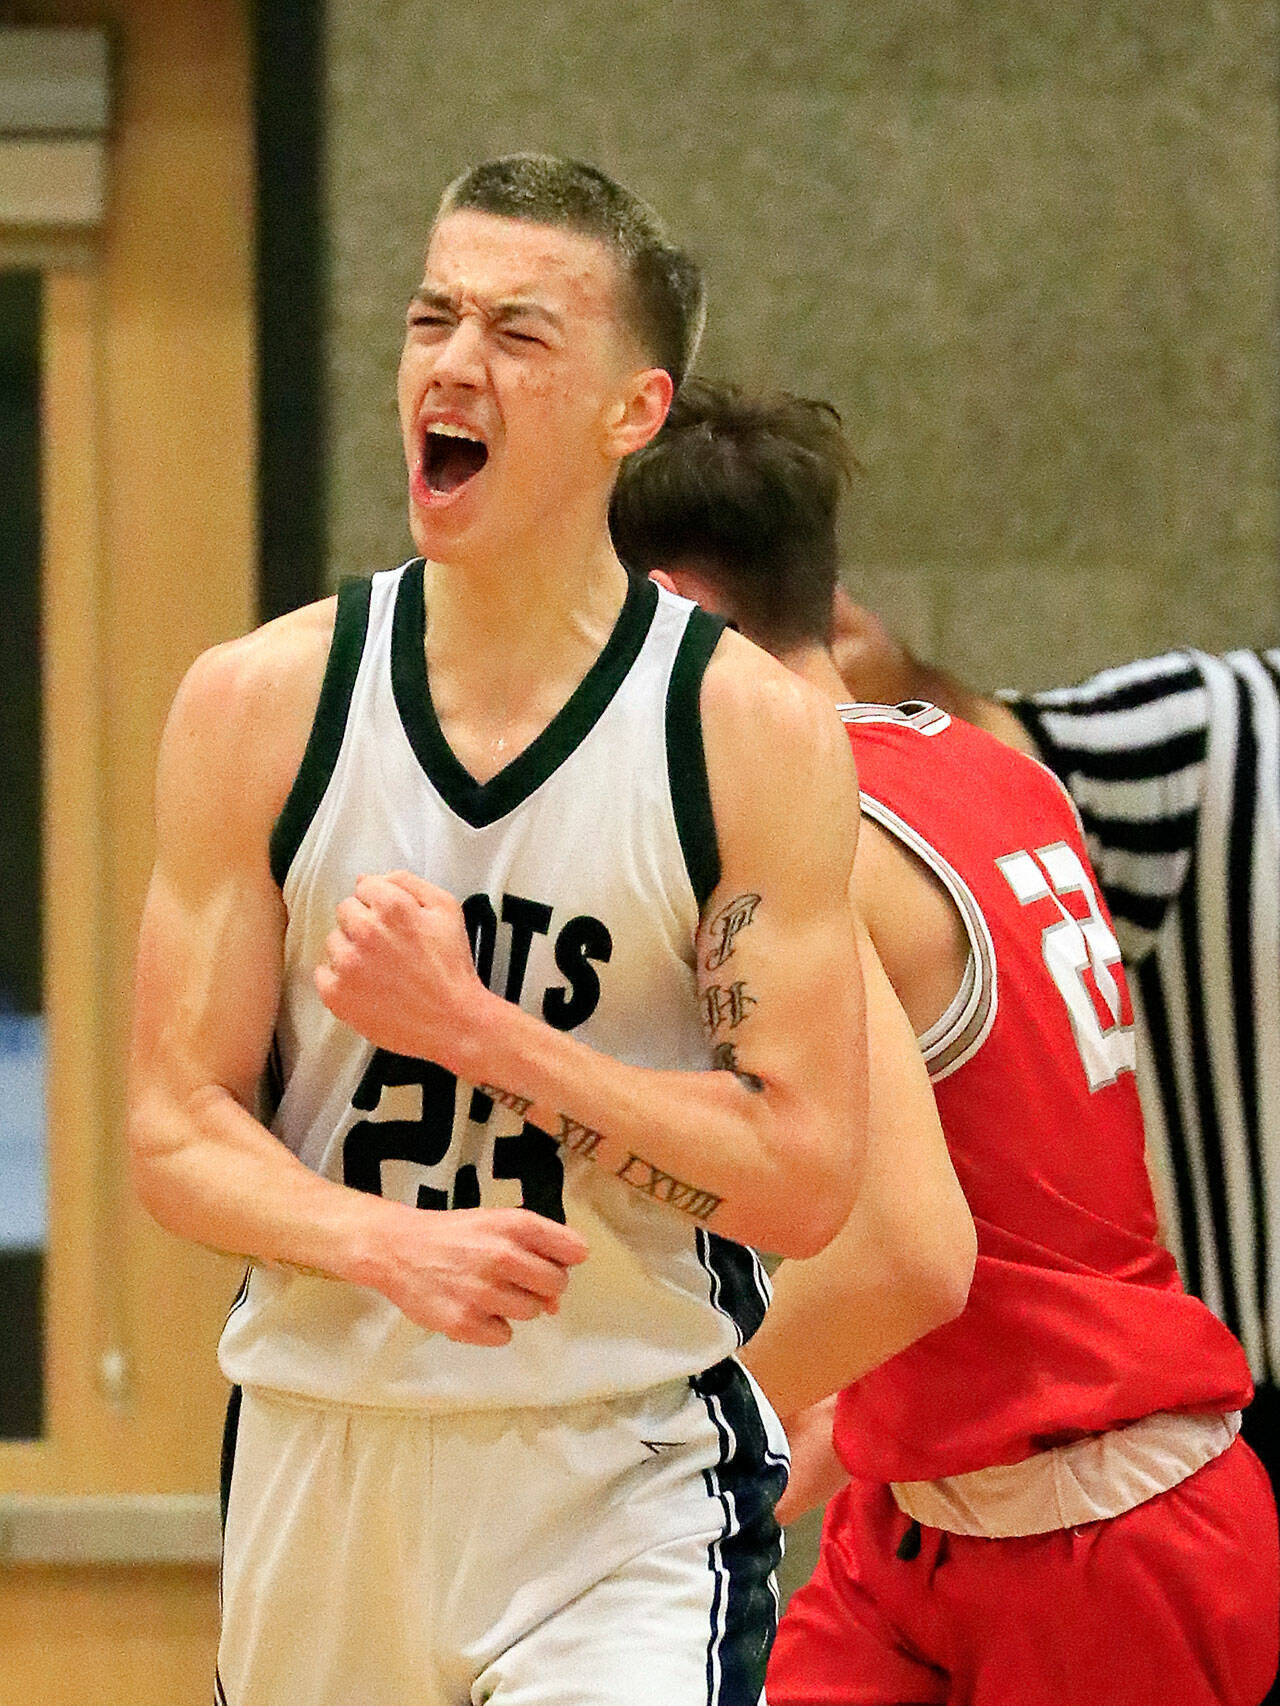 Parker Baumann celebrates one of his baskets. (Kevin Clark / The Herald)